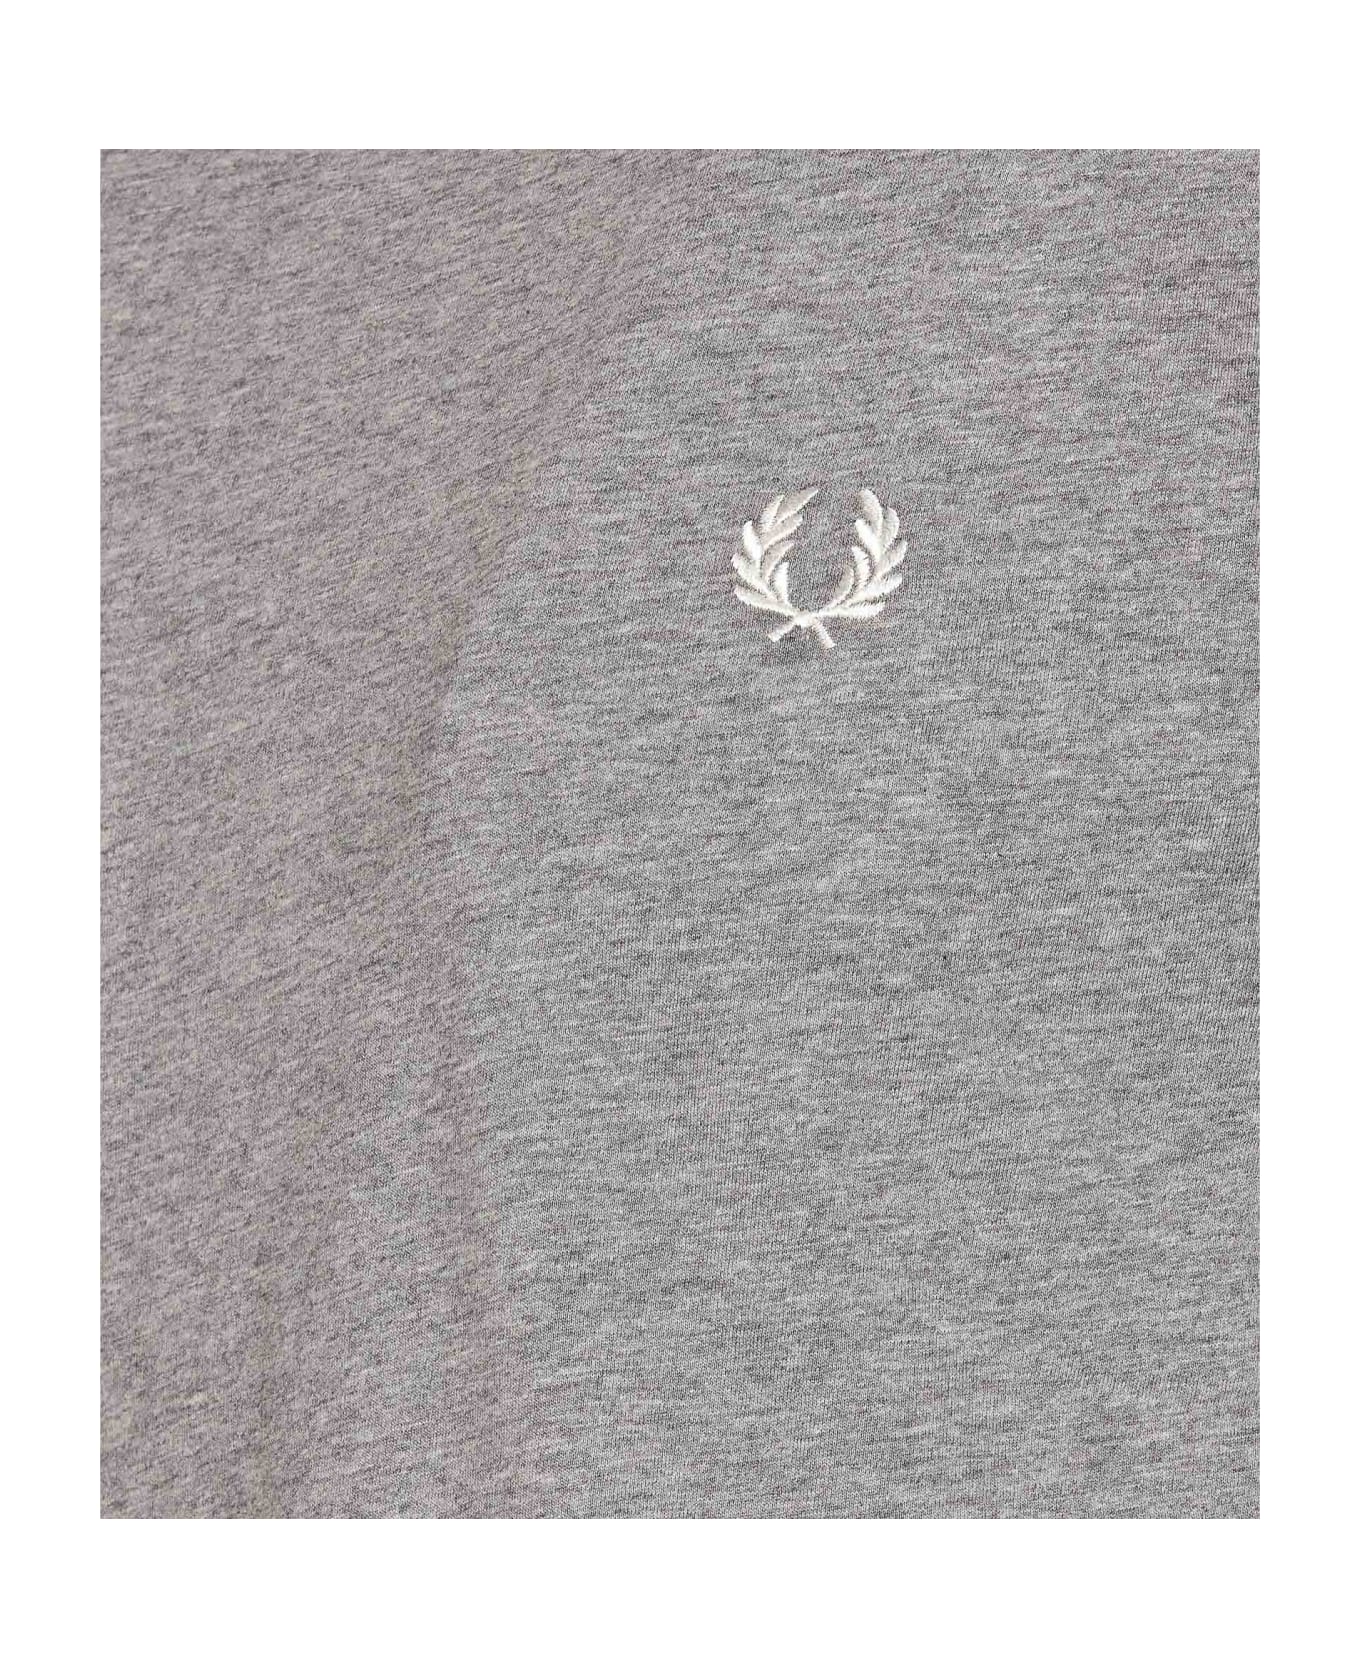 Fred Perry Twin Tipped T-shirt - Steel Marl